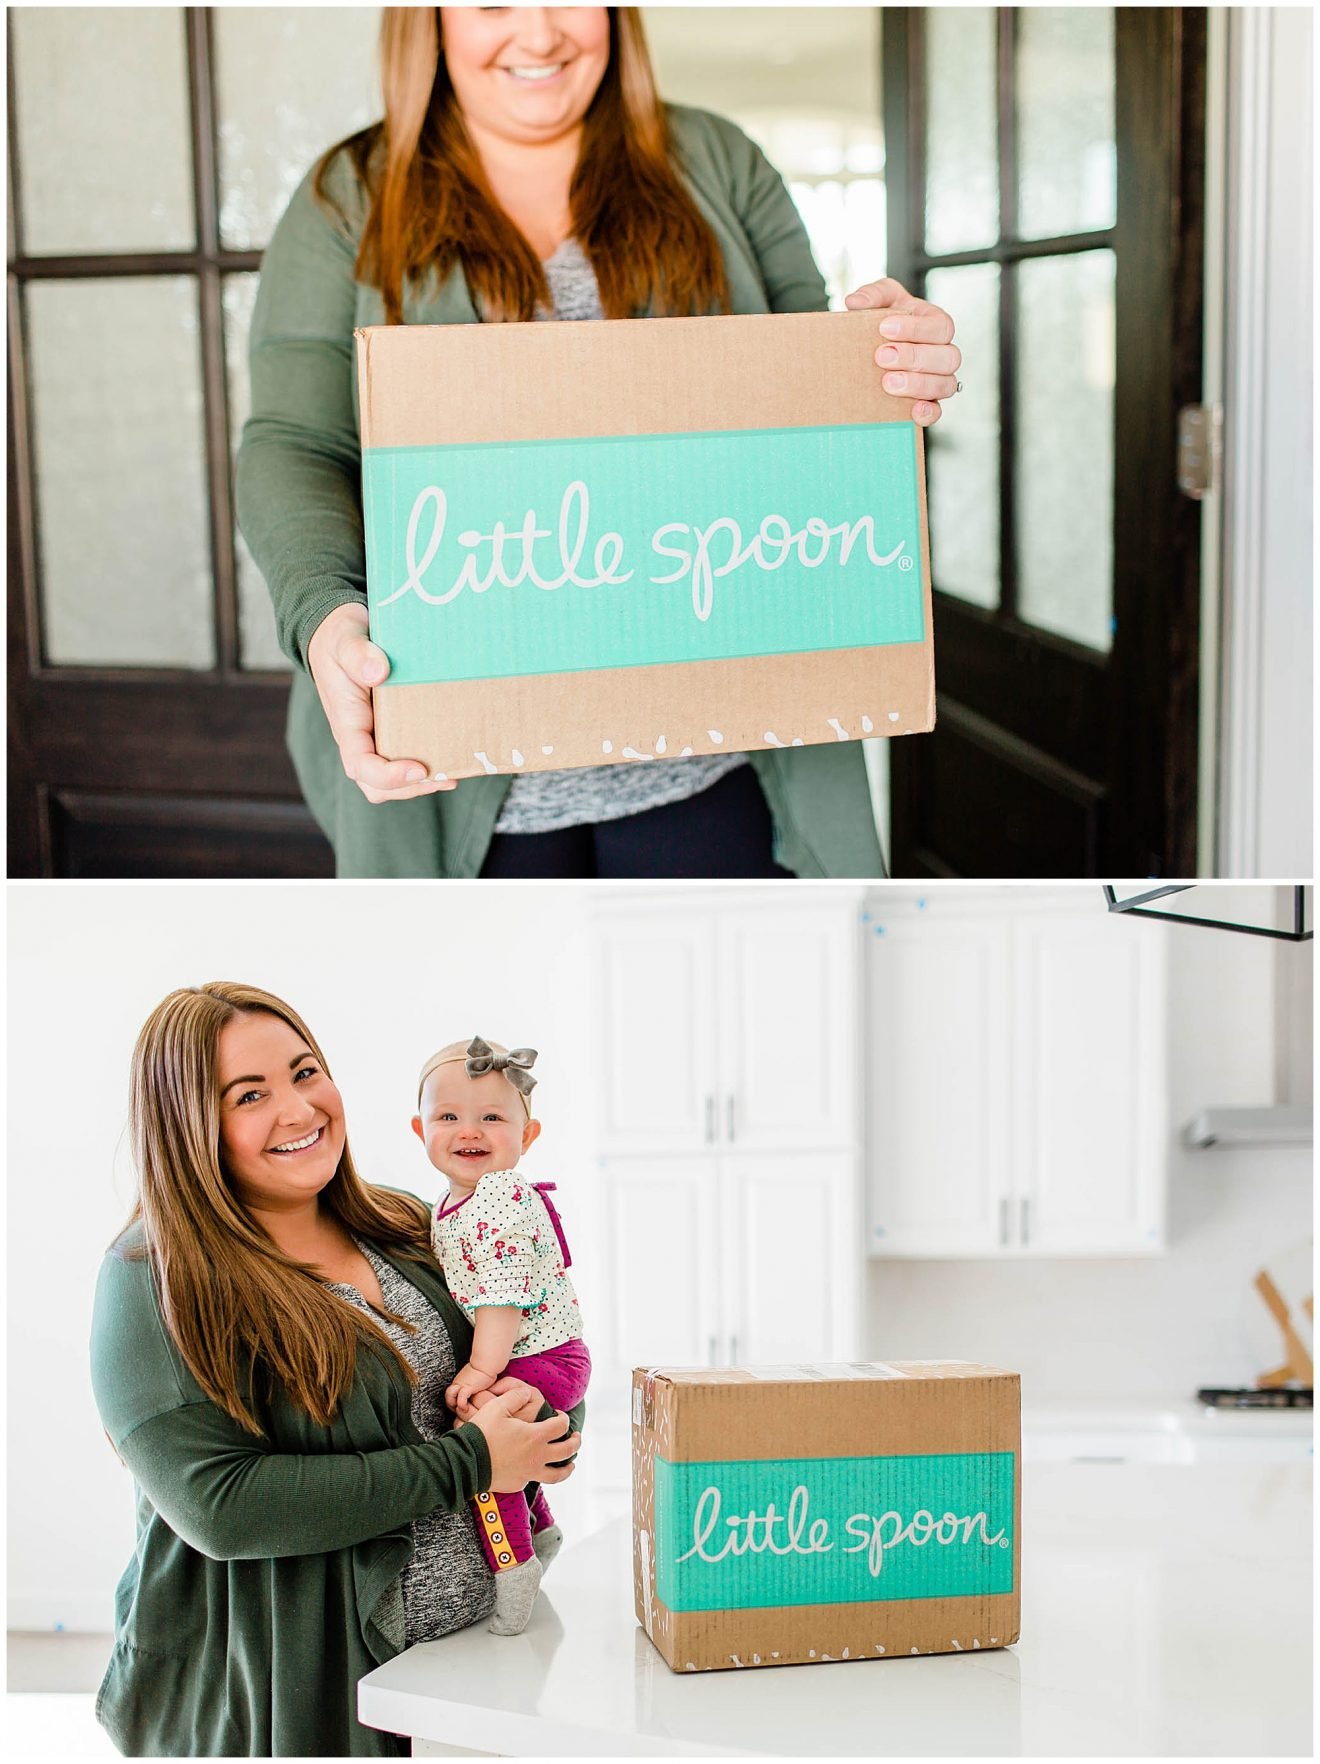 Mom getting her delivery of Little Spoon and bringing it into her kitchen with her baby girl.